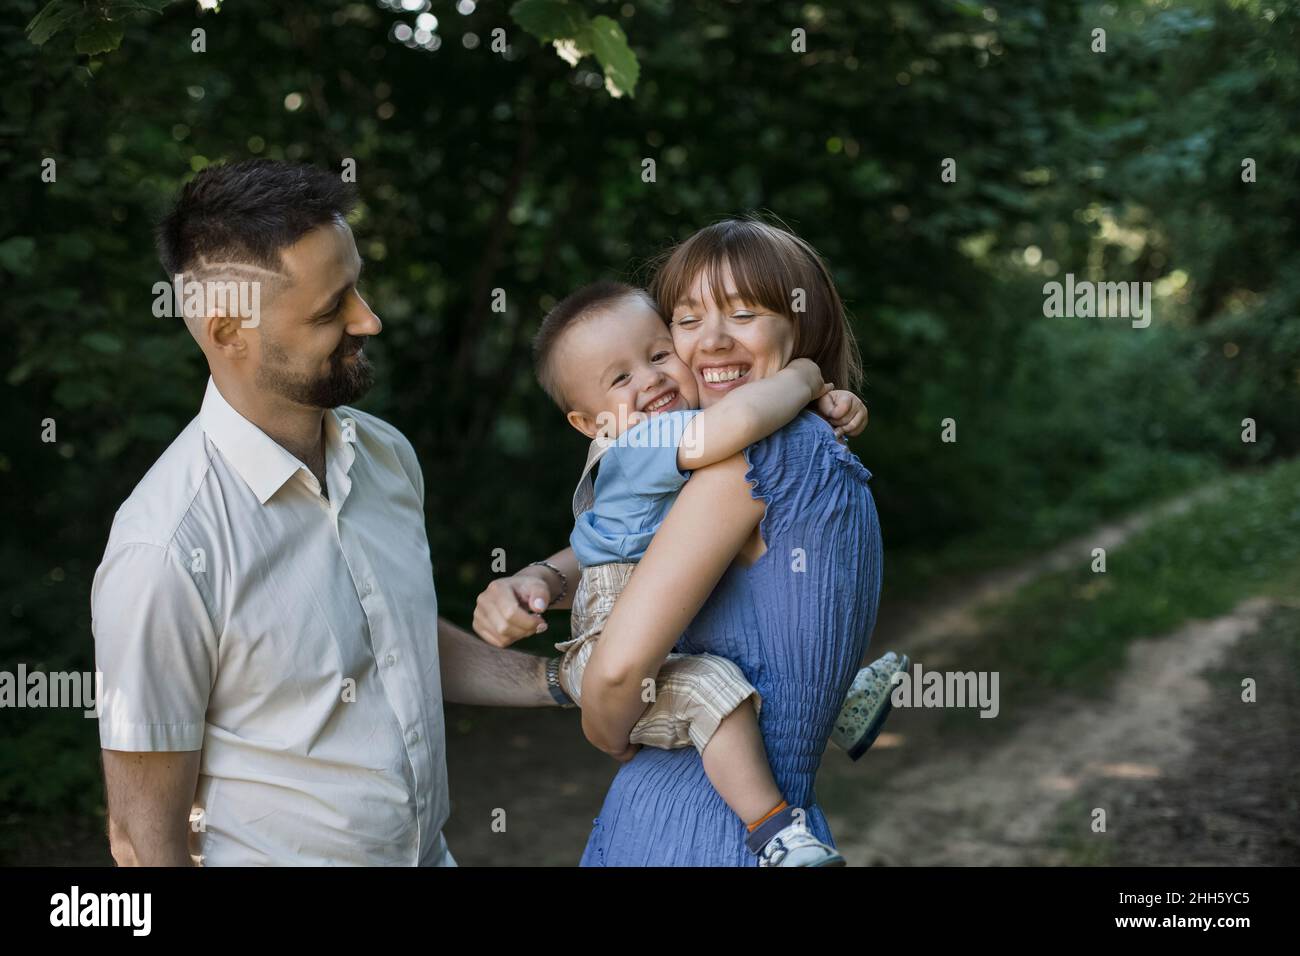 Happy mother embracing son standing by man at park Stock Photo